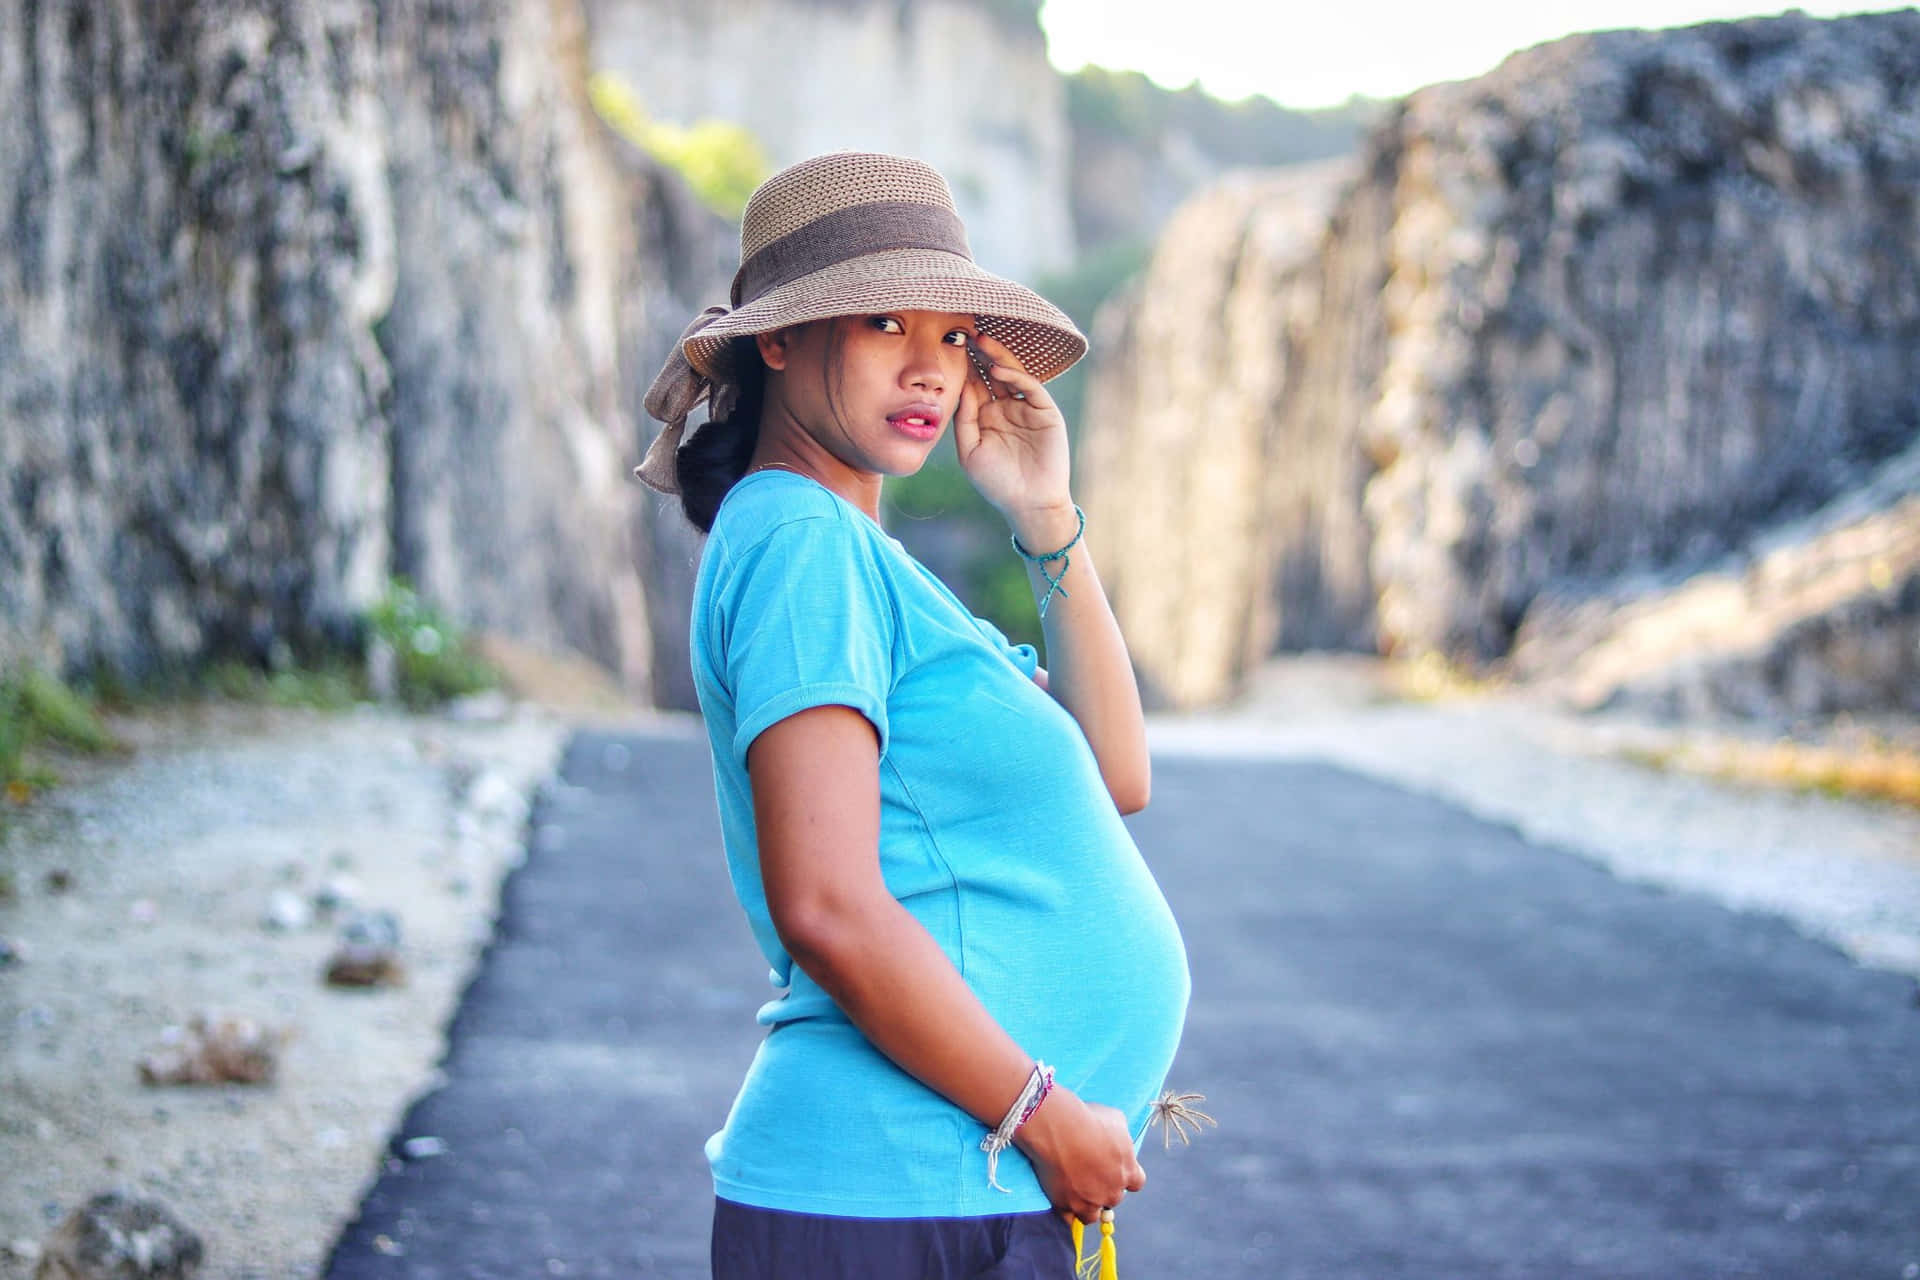 A Pregnant Woman In A Blue Shirt And Hat Standing On A Road